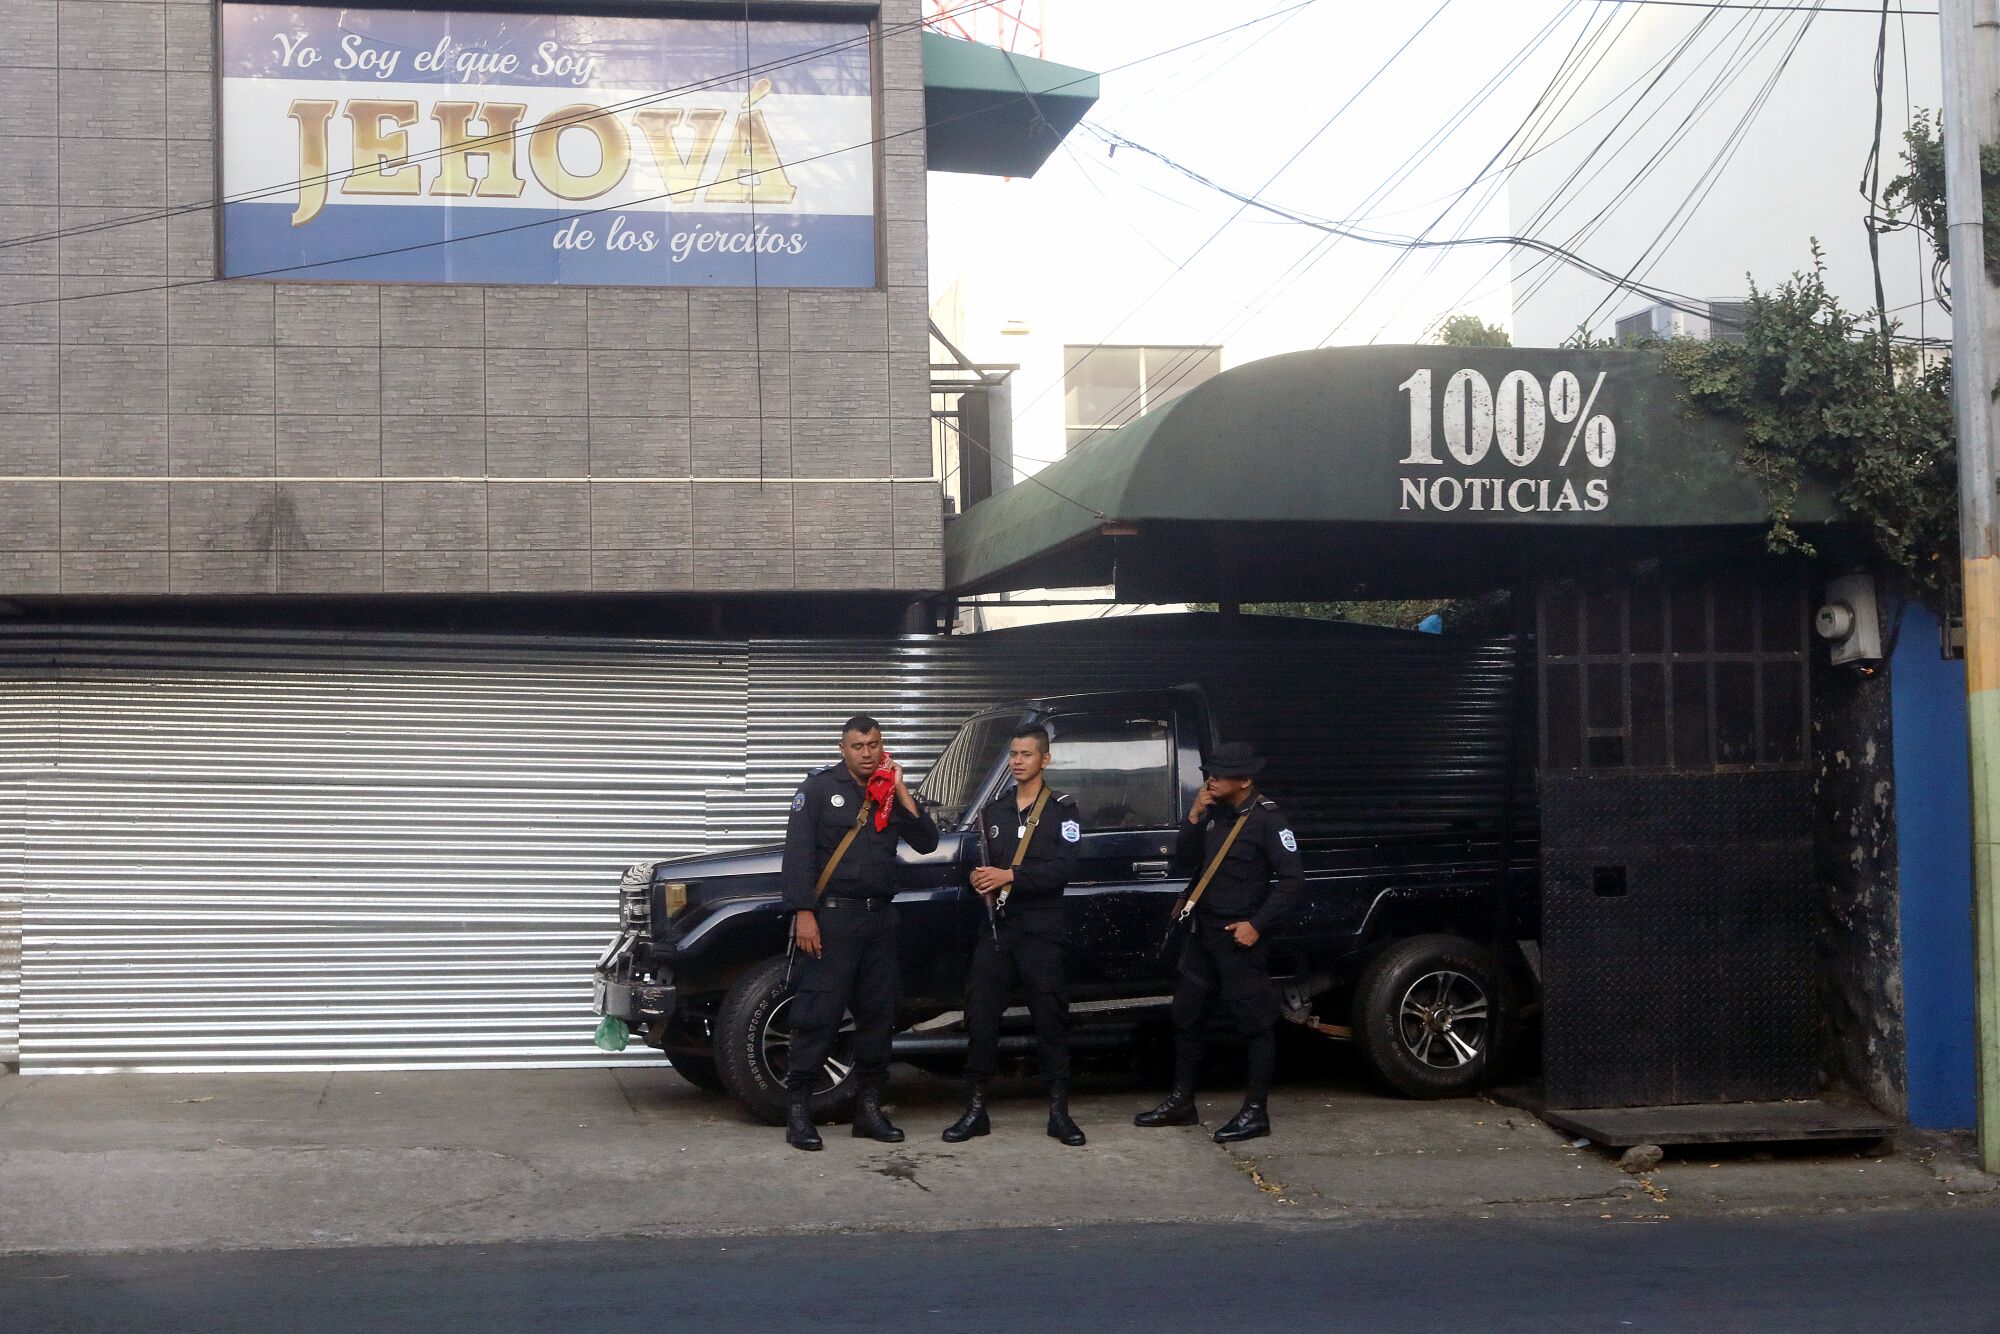 Nicaraguan police stand guard outside the news channel 100% Noticias, which was shut down by the government in 2018.